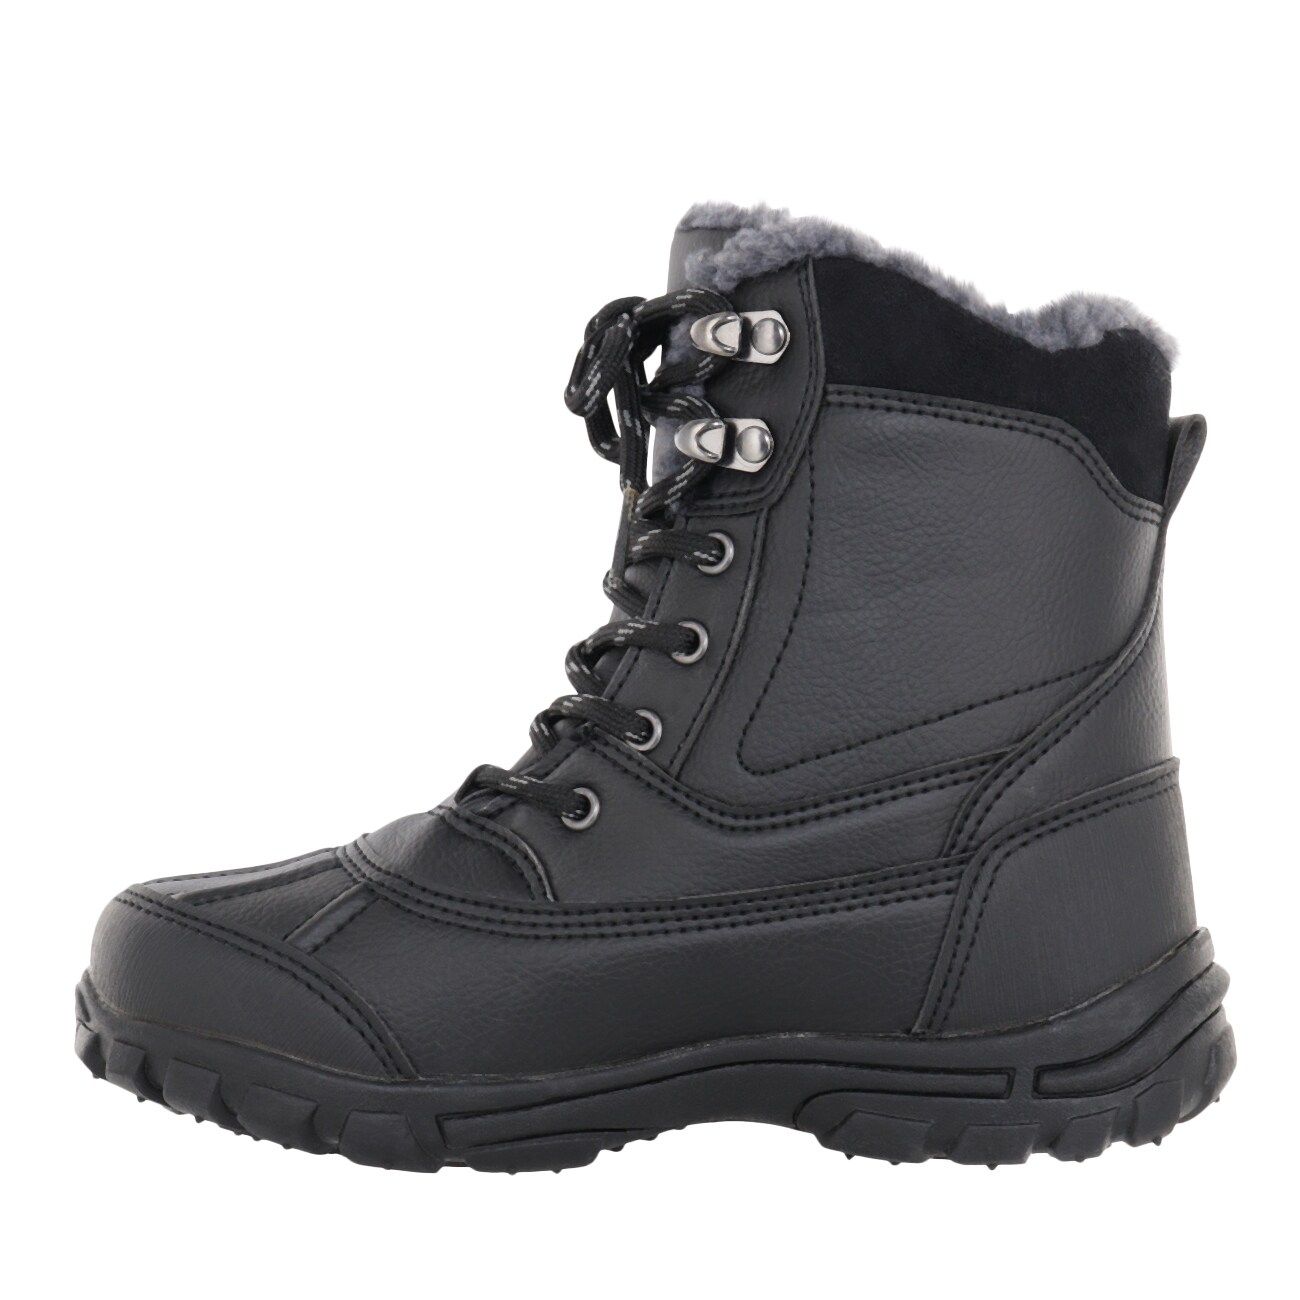 Elements Youth Boy's Chute Winter Boot | DSW Canada